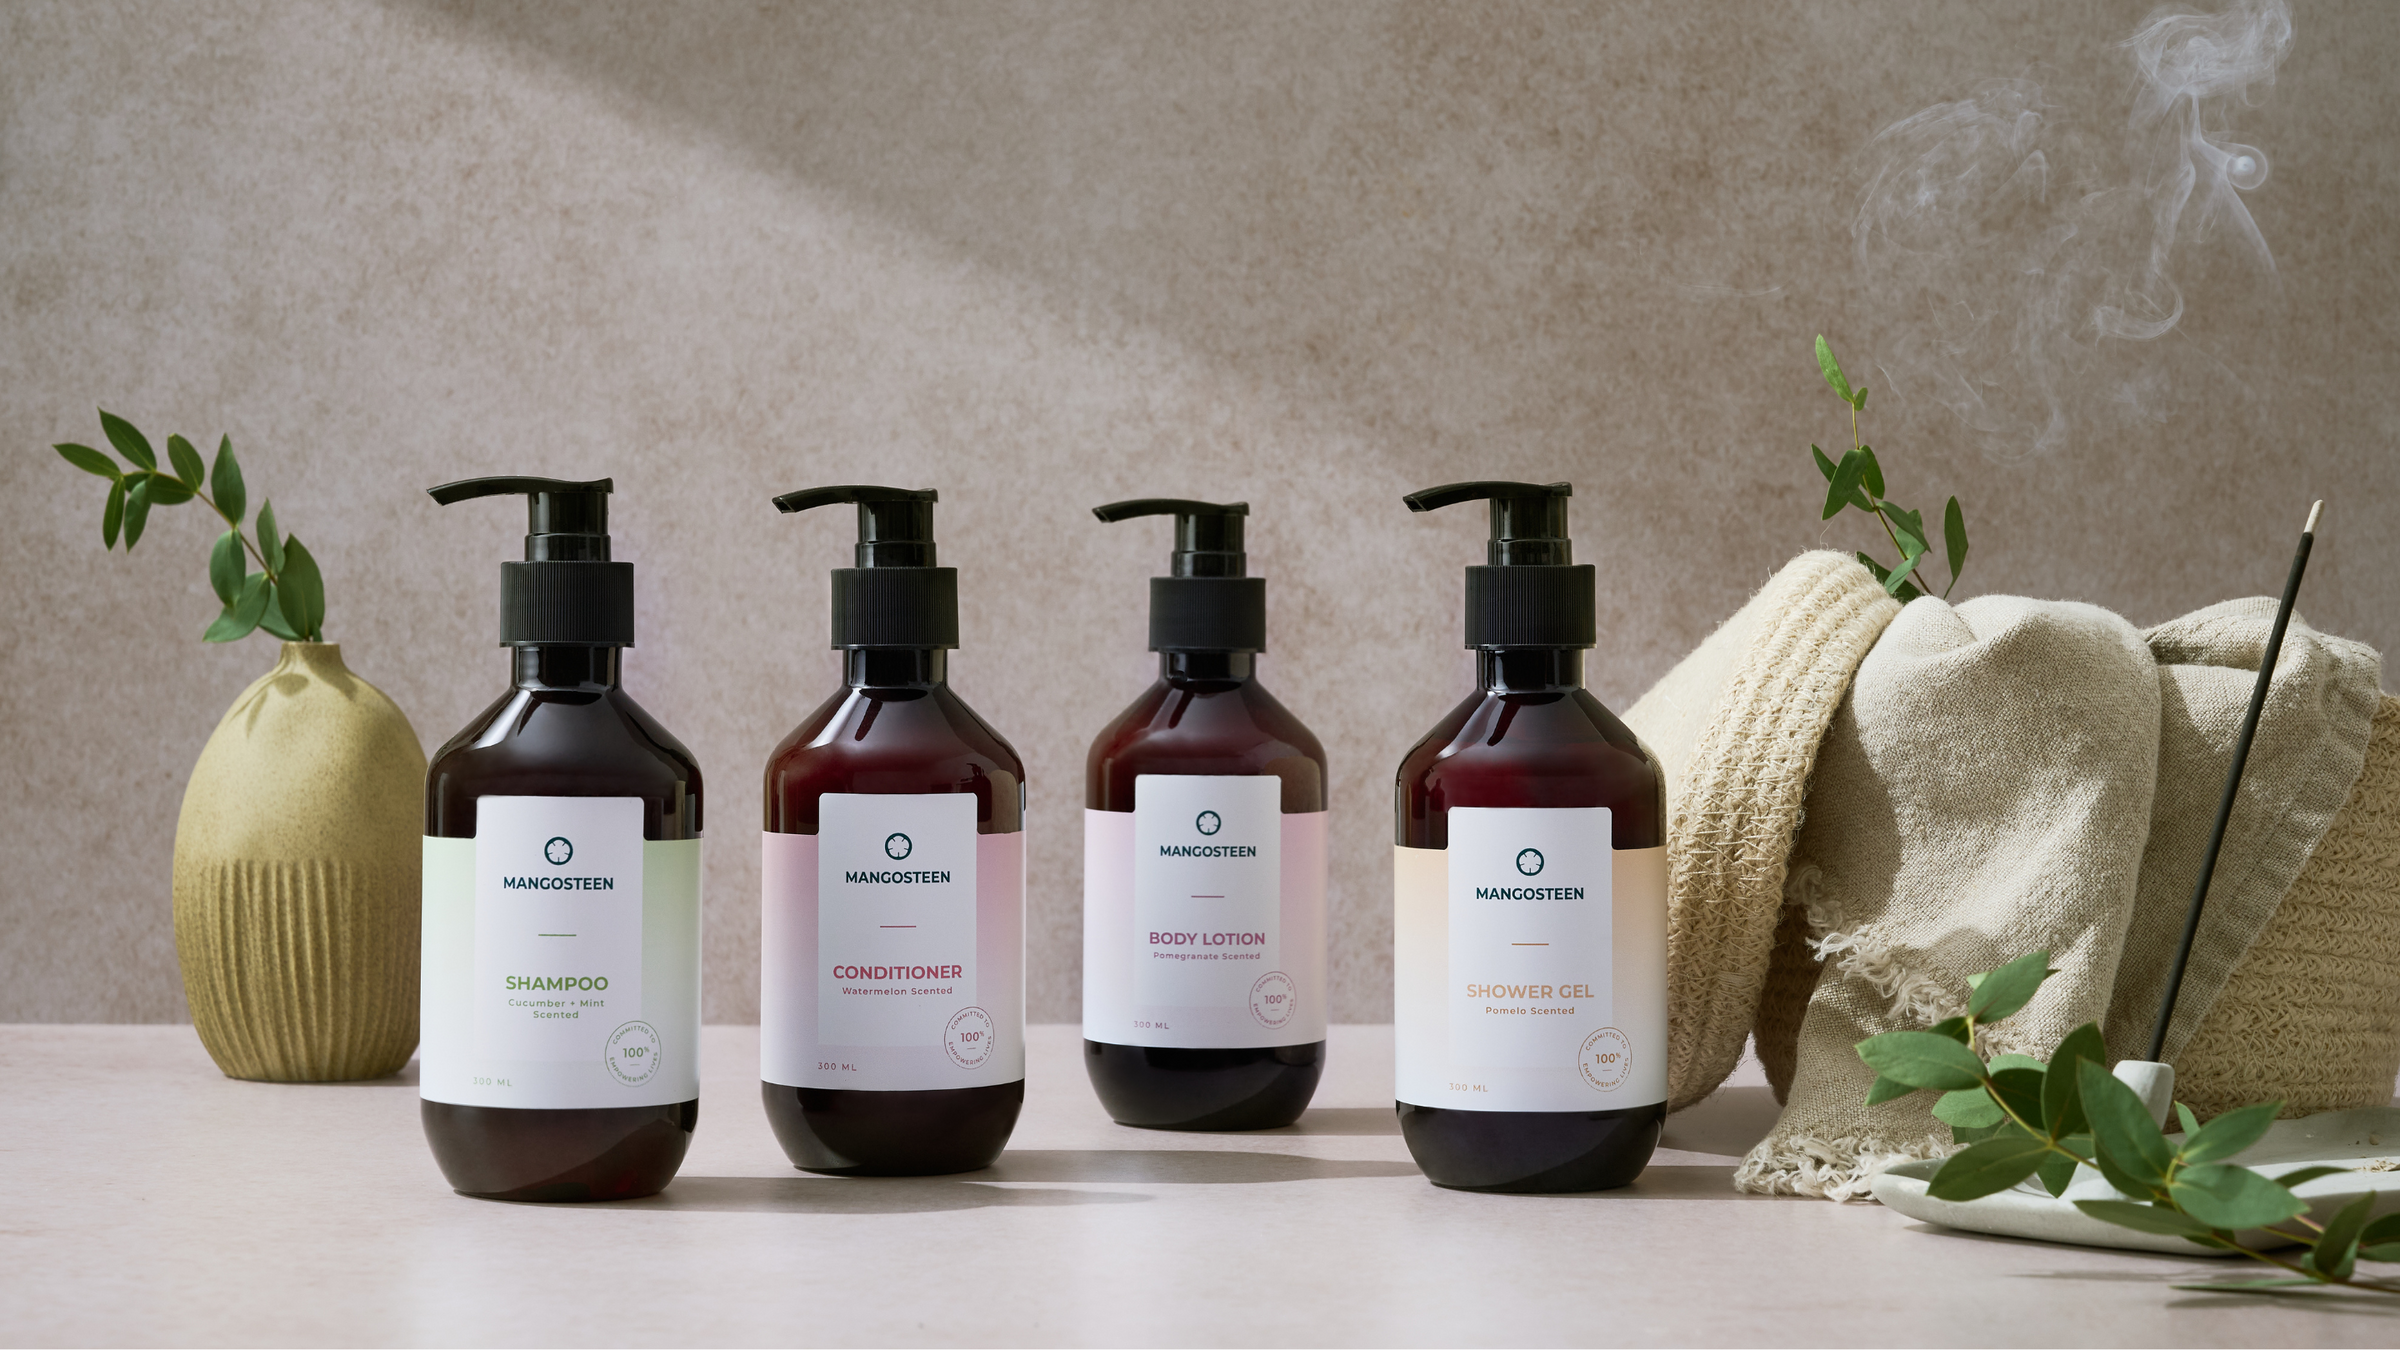 Pamper Gift Set: Cucumber & Mint Shampoo, Watermelon Conditioner, Pomegranate Body Lotion, Pomelo Shower Gel